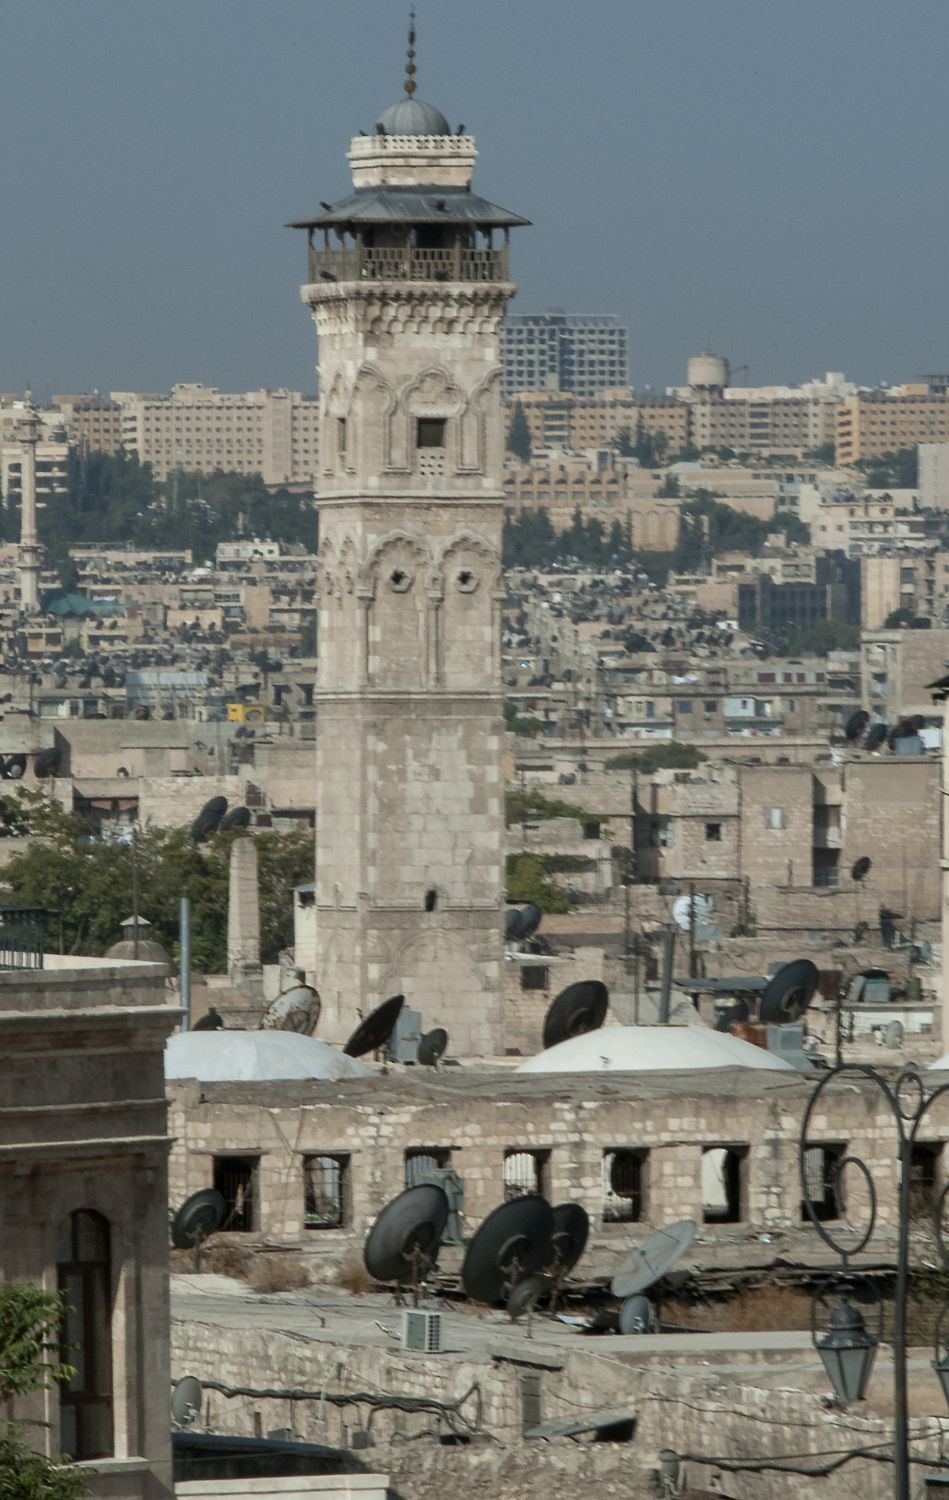 View of minaret from citadel (east).